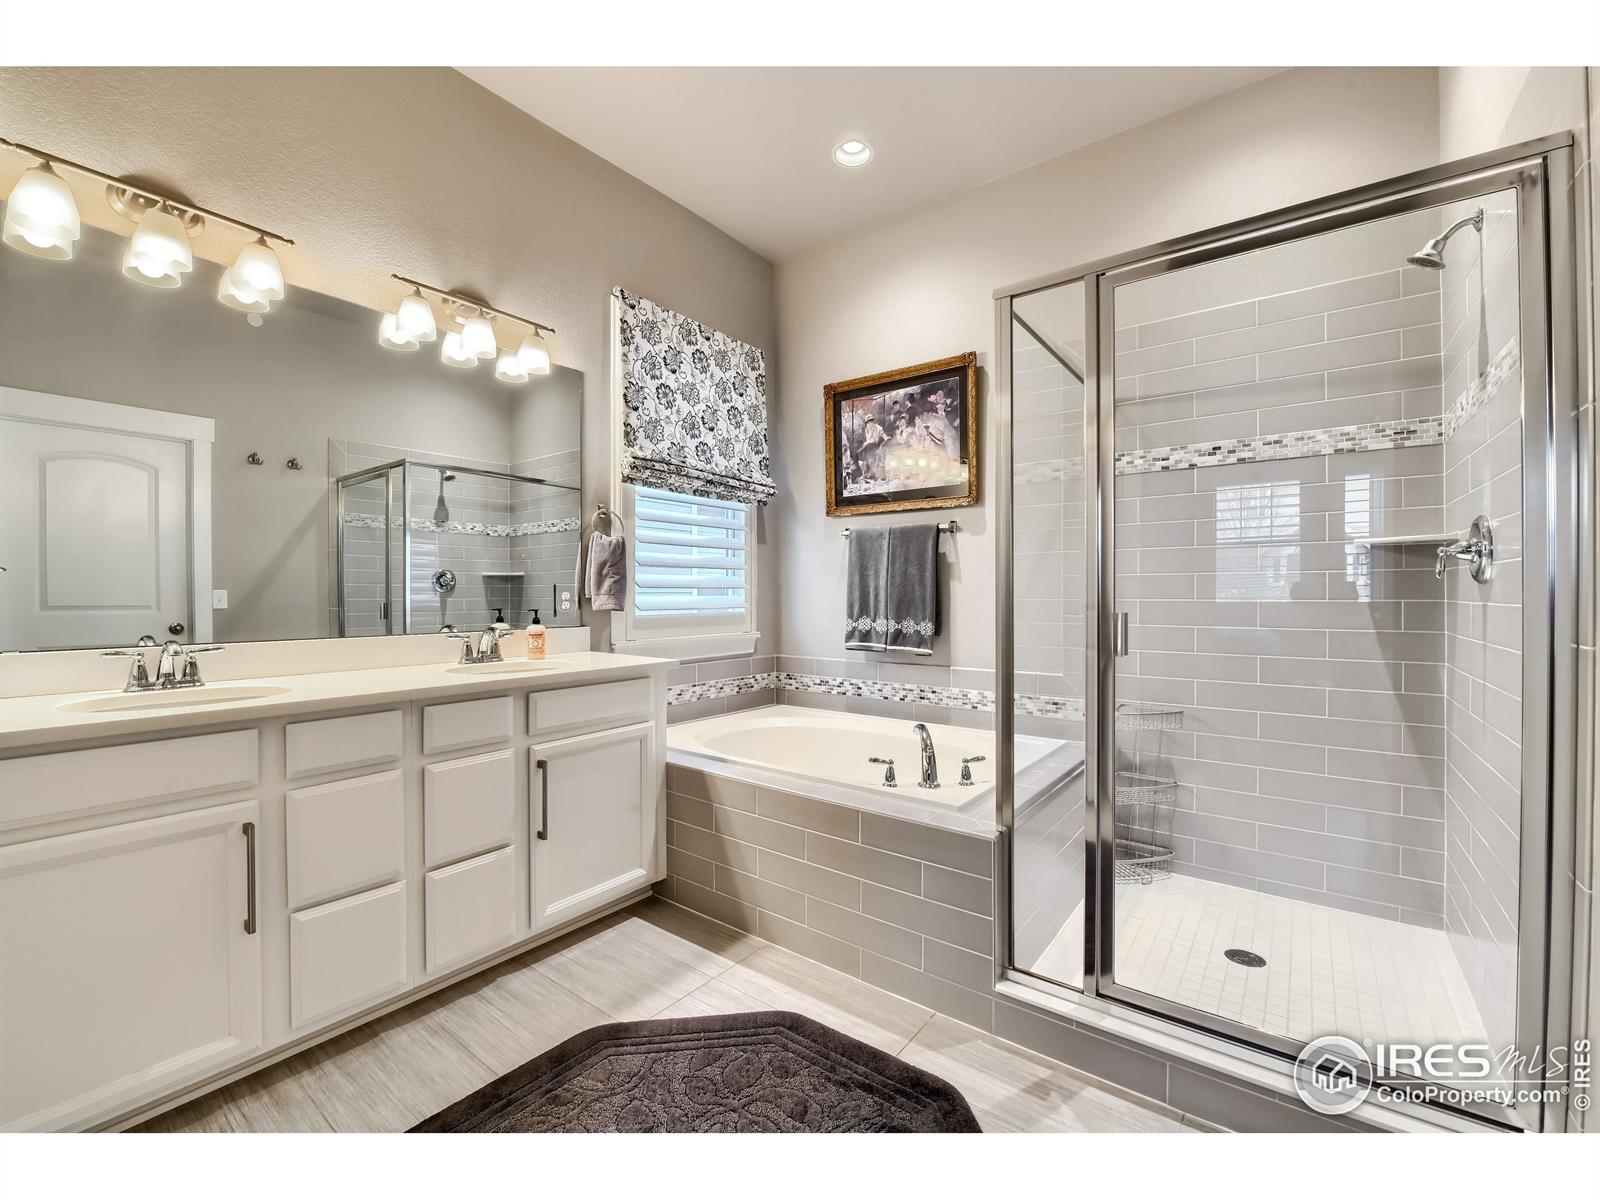 5560 97th, Westminster, CO